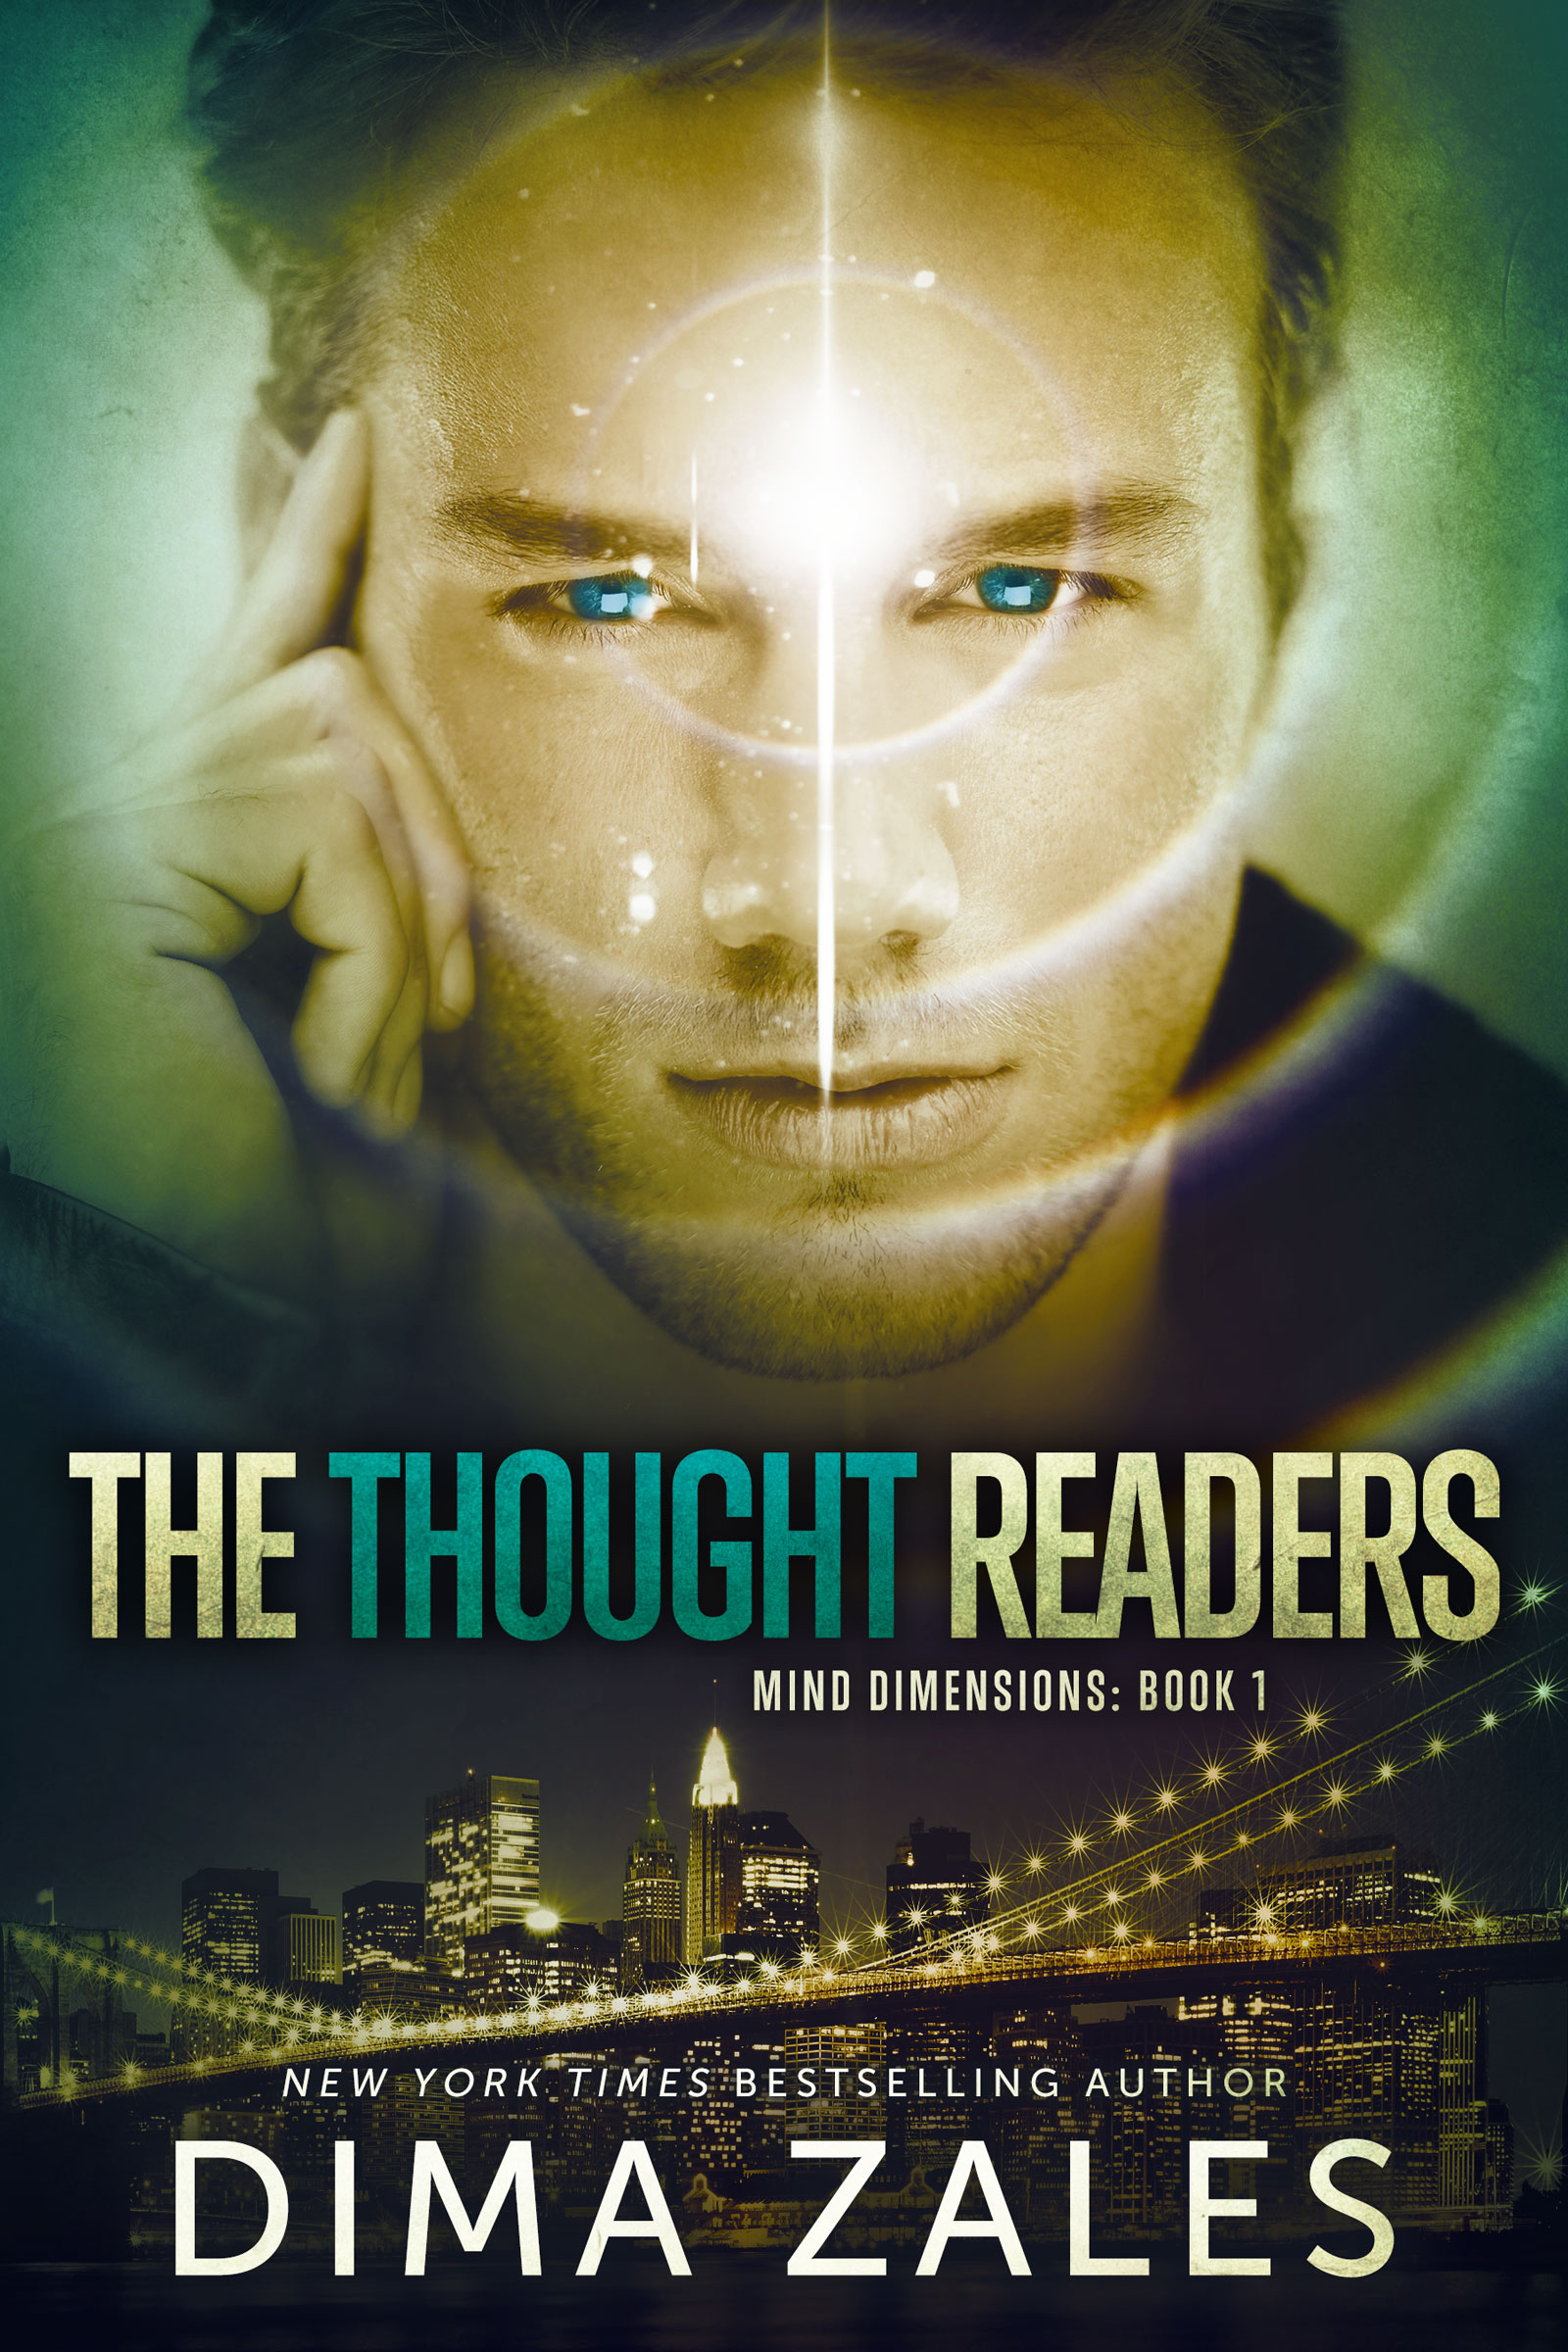 FREE: The Thought Readers by Dima Zales